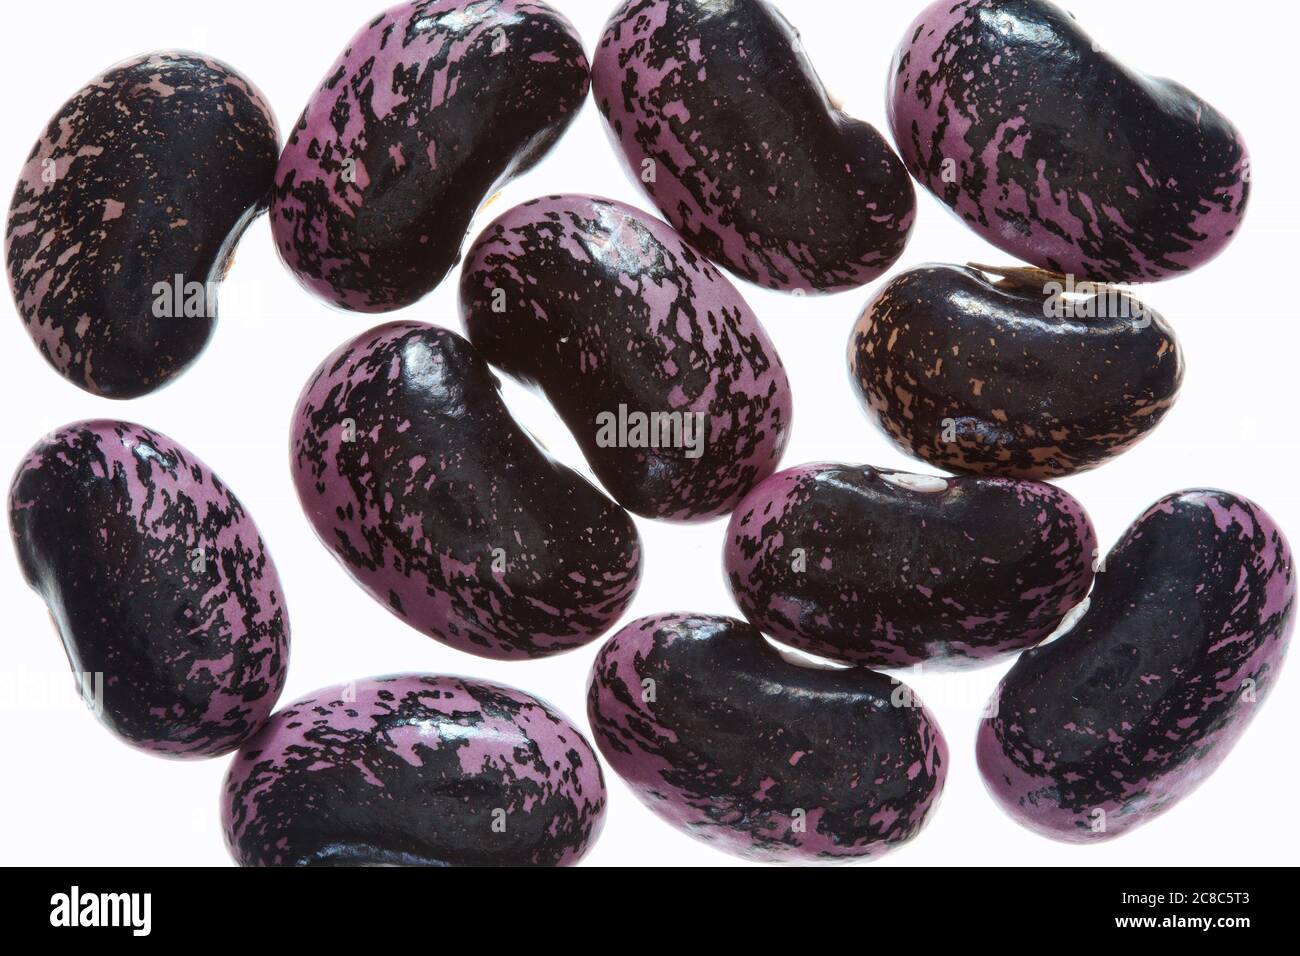 Scarlet Runner beans ( Phaseolus coccineus) red flower seeds background isolated on a white background stock photo Stock Photo